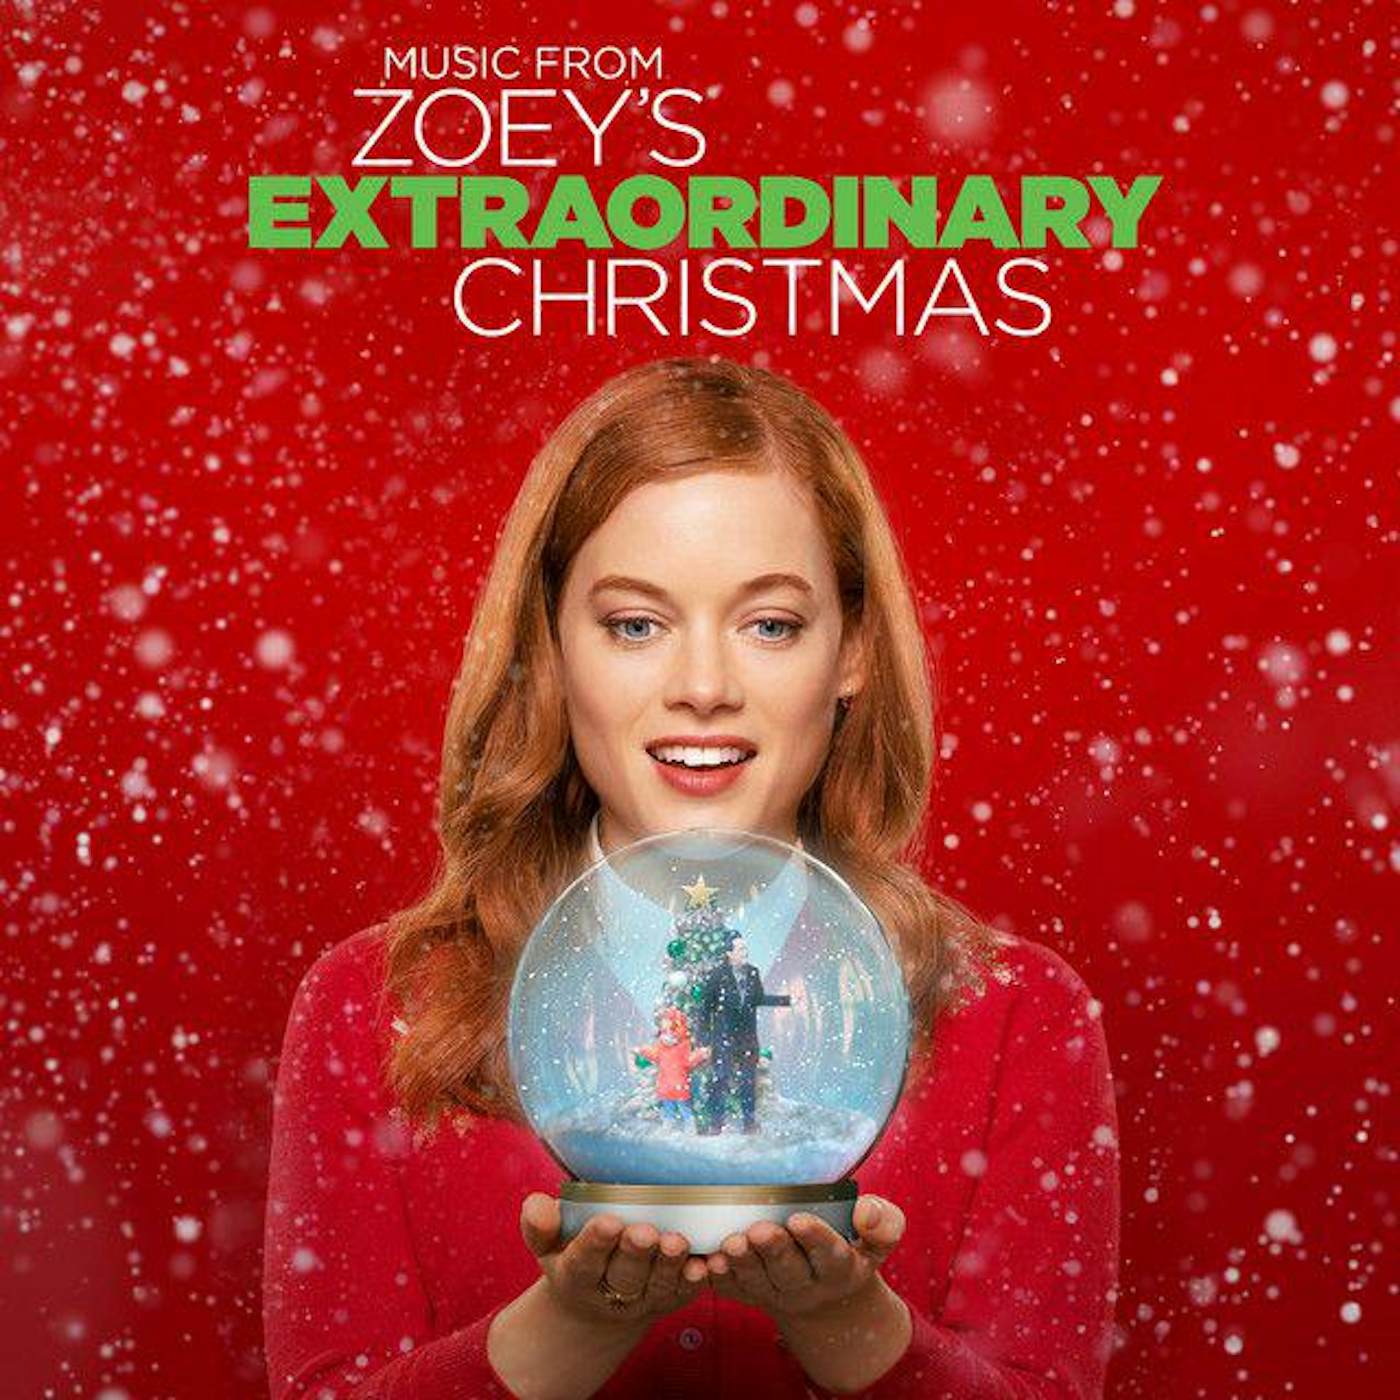 Tori Kelly Music From Zoey’s Extraordinary Christmas Original Soundtrack (Tran Red/Green Split Christmas Cookie) Vinyl Record